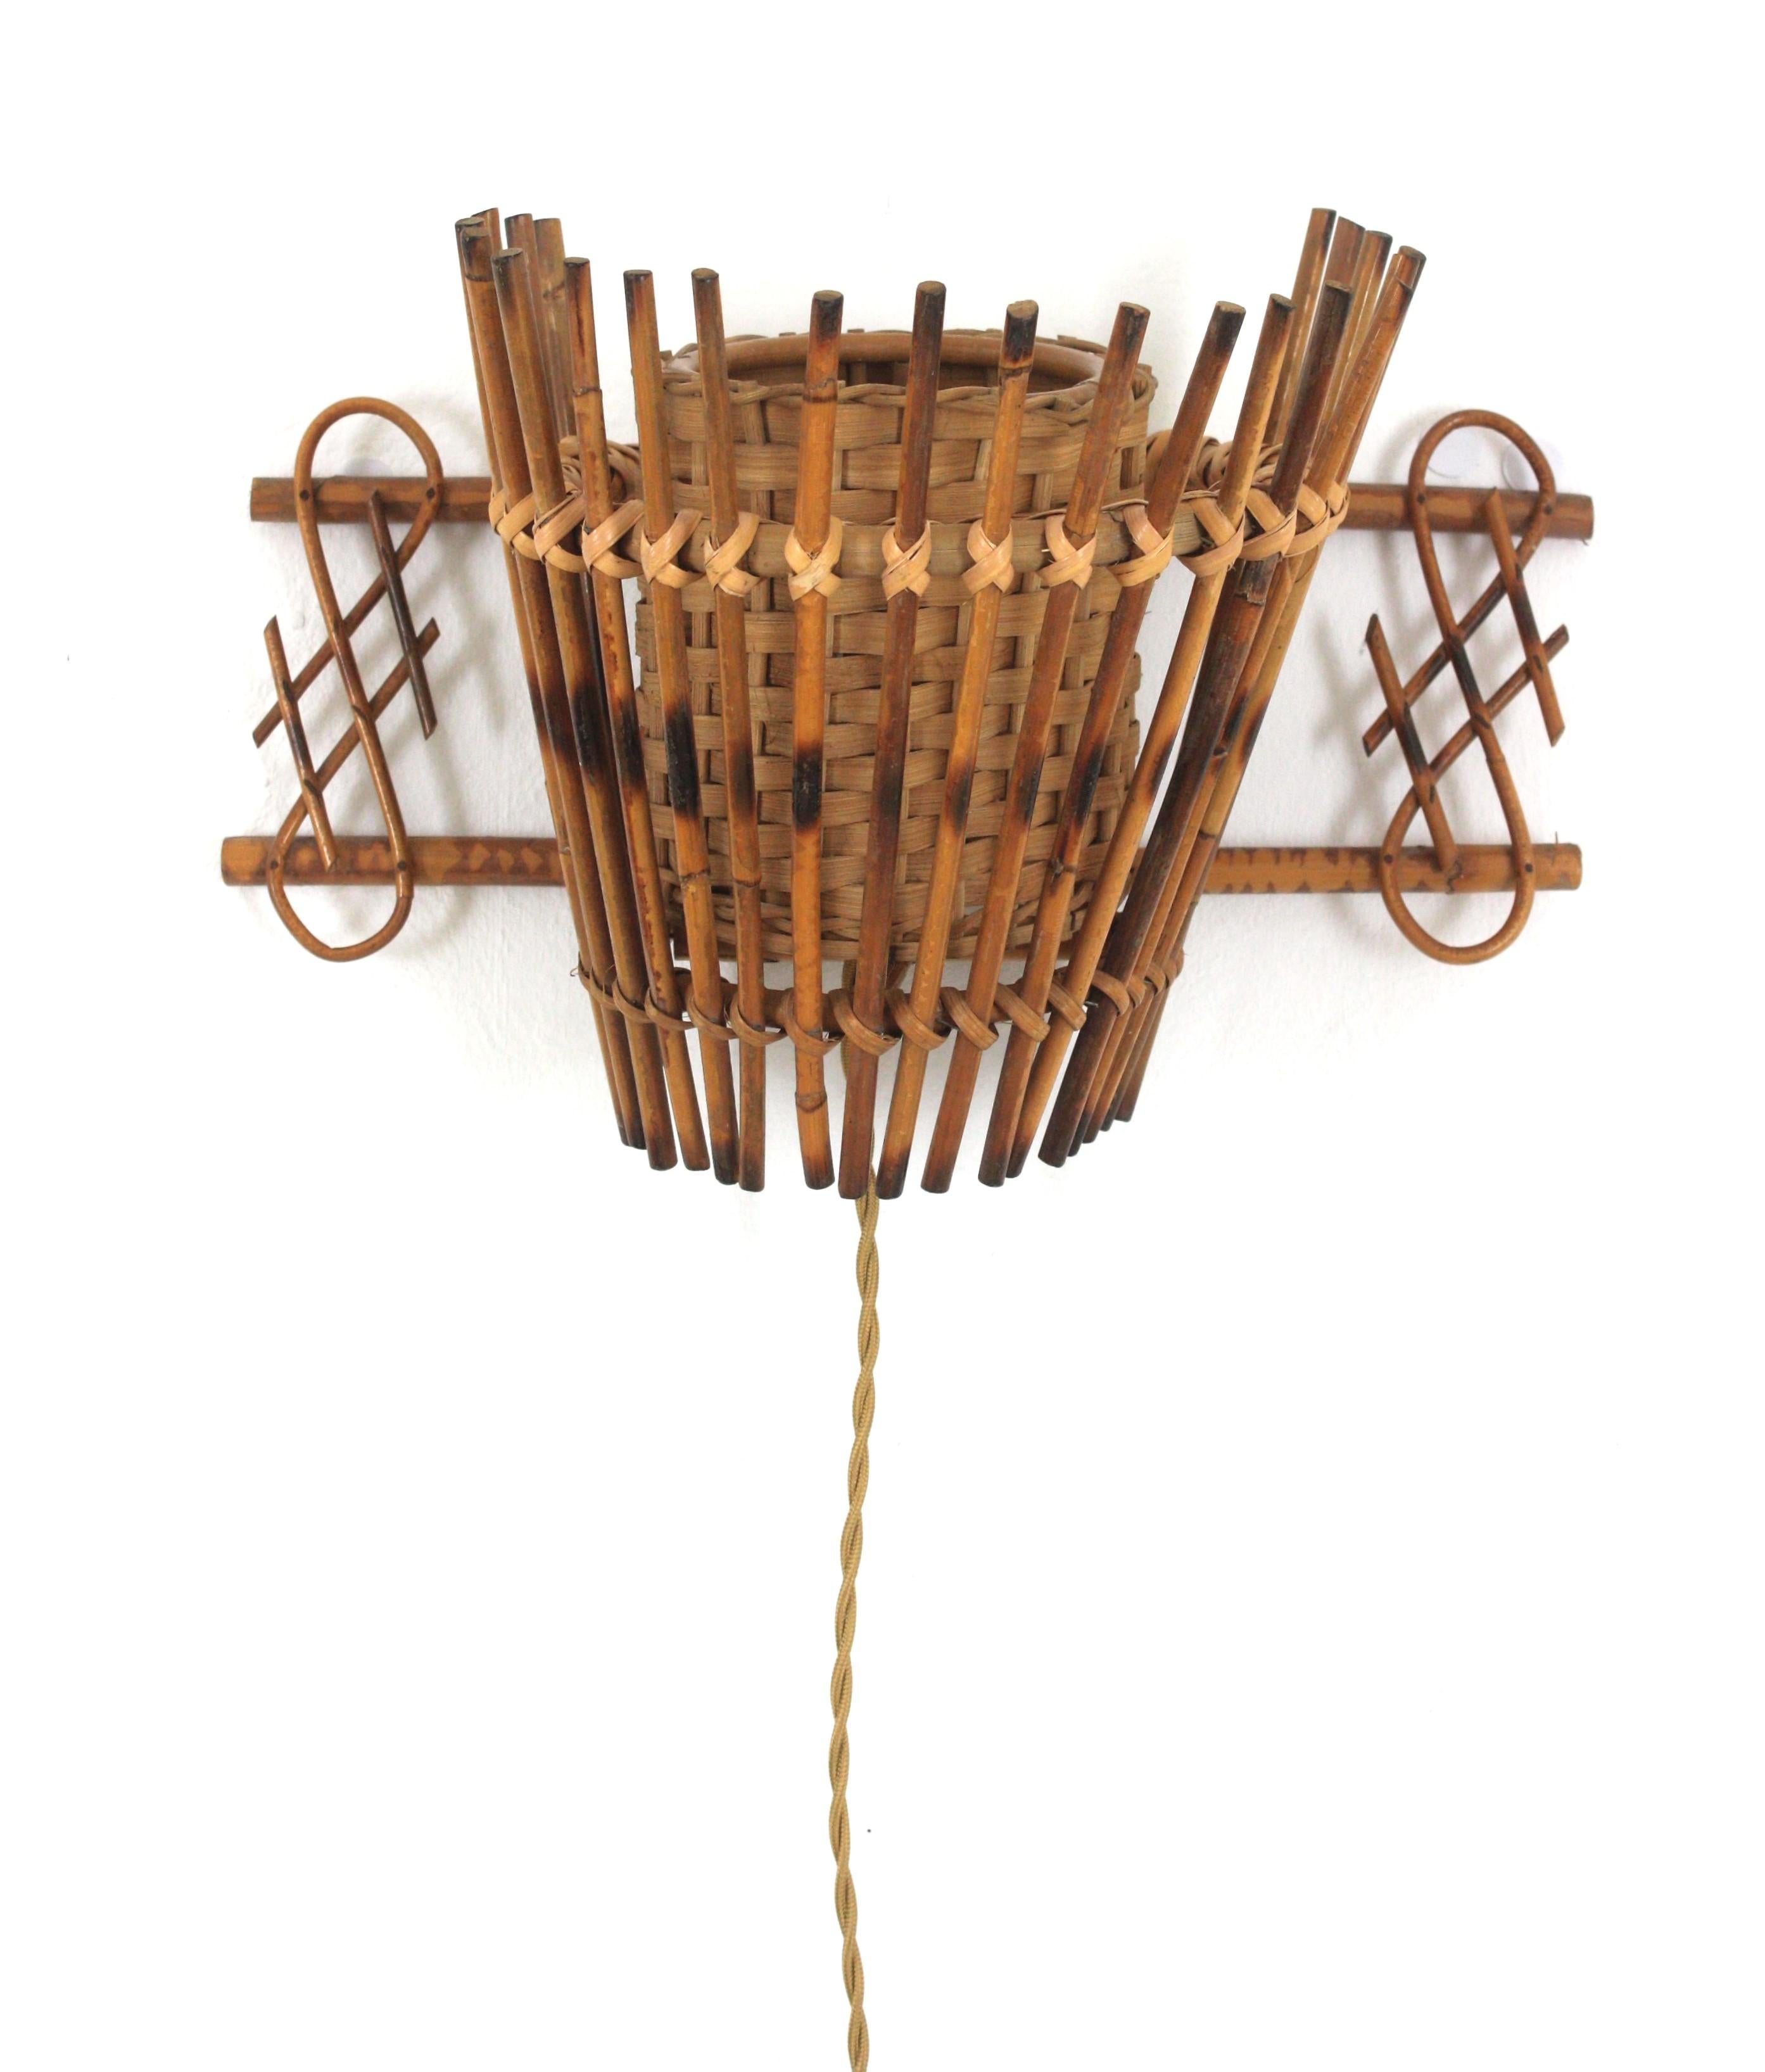 Mid-Century Modern Wall Sconce in Rattan and Woven Wicker. France, 1950s.
This French Riviera conical rattan wall light has an eye-catching design with chinoiserie decorations at both sides. It has an interior woven wicker cylinder lampshade to